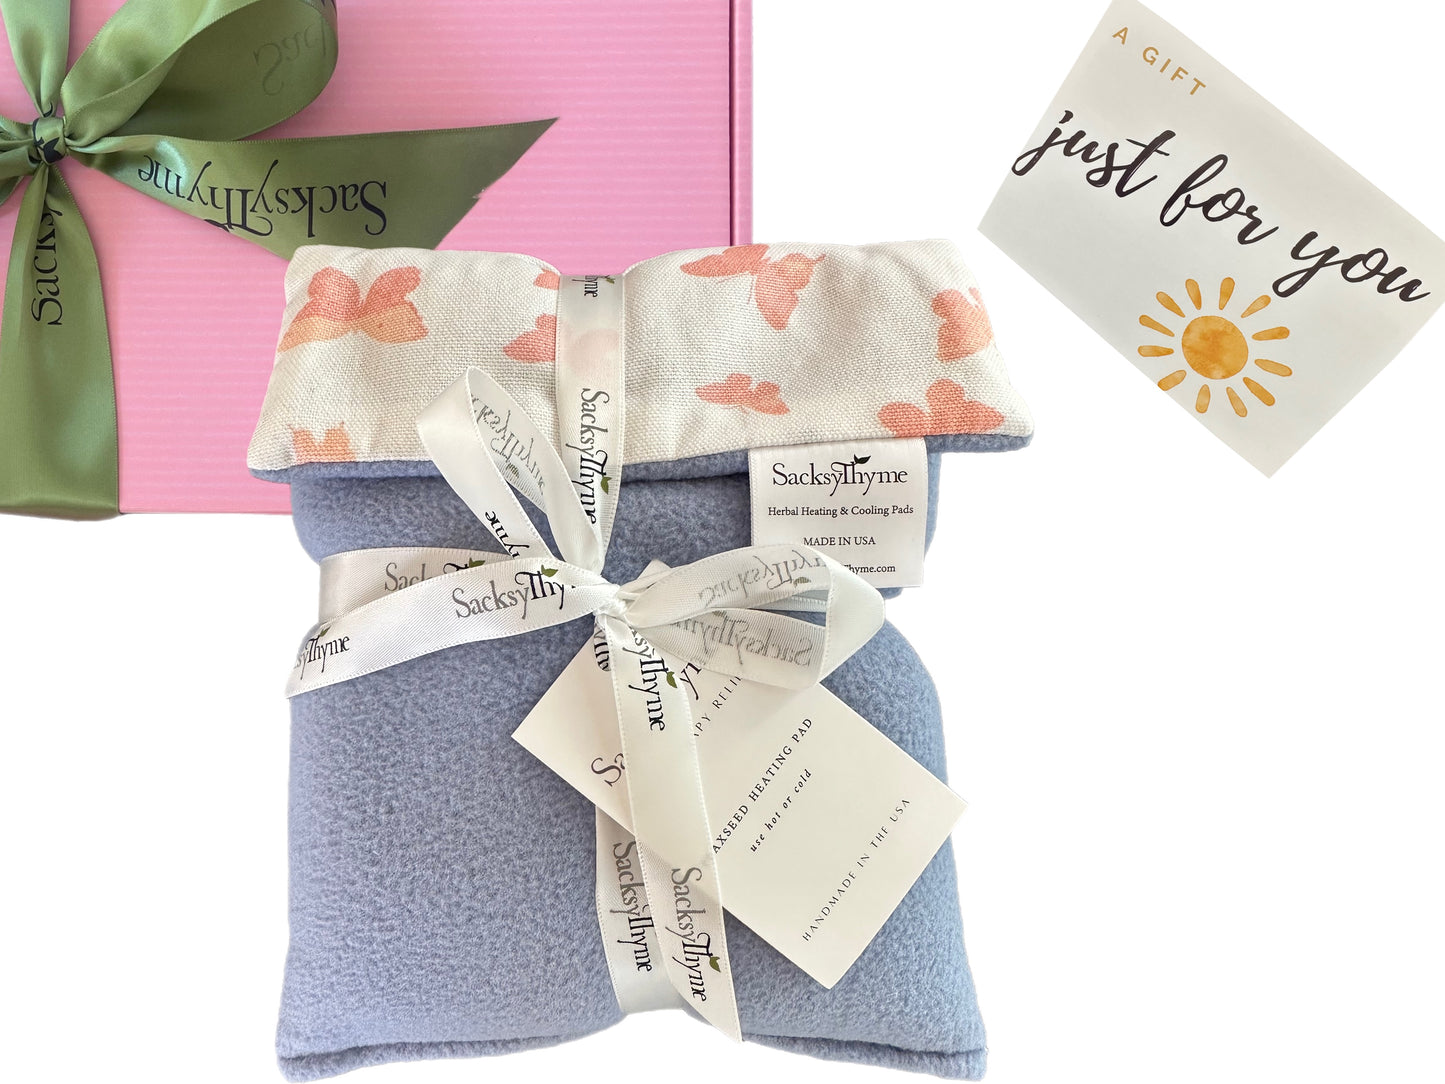 Hot Therapy Relief Pad- Limited Edition w/gift box